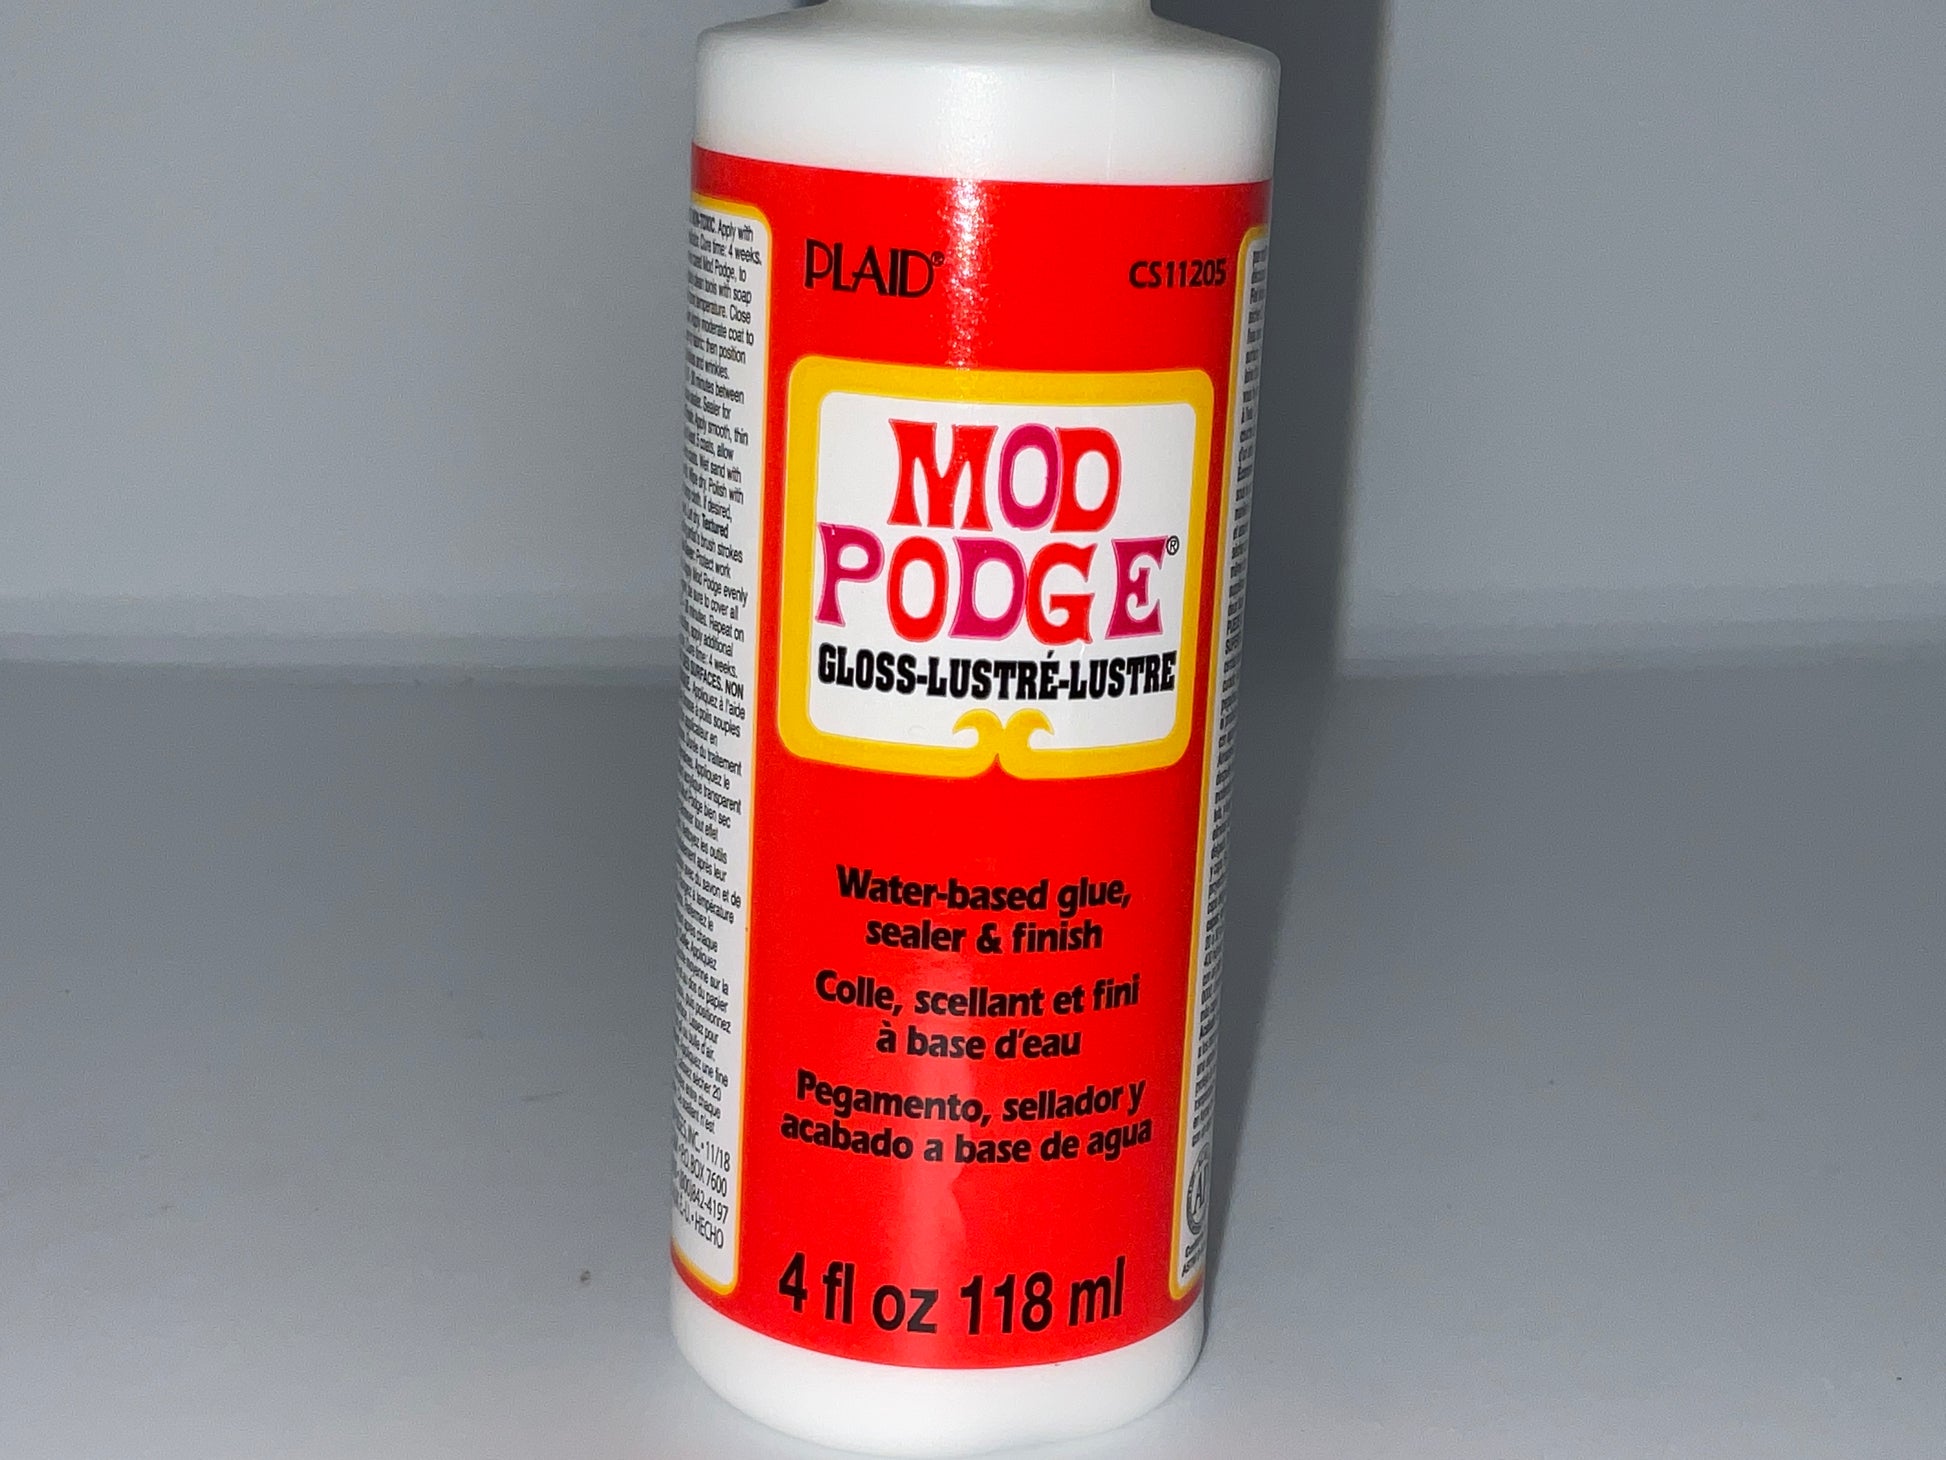 Mod Podge Water-based glue, sealer and finish – Me Time Specialty